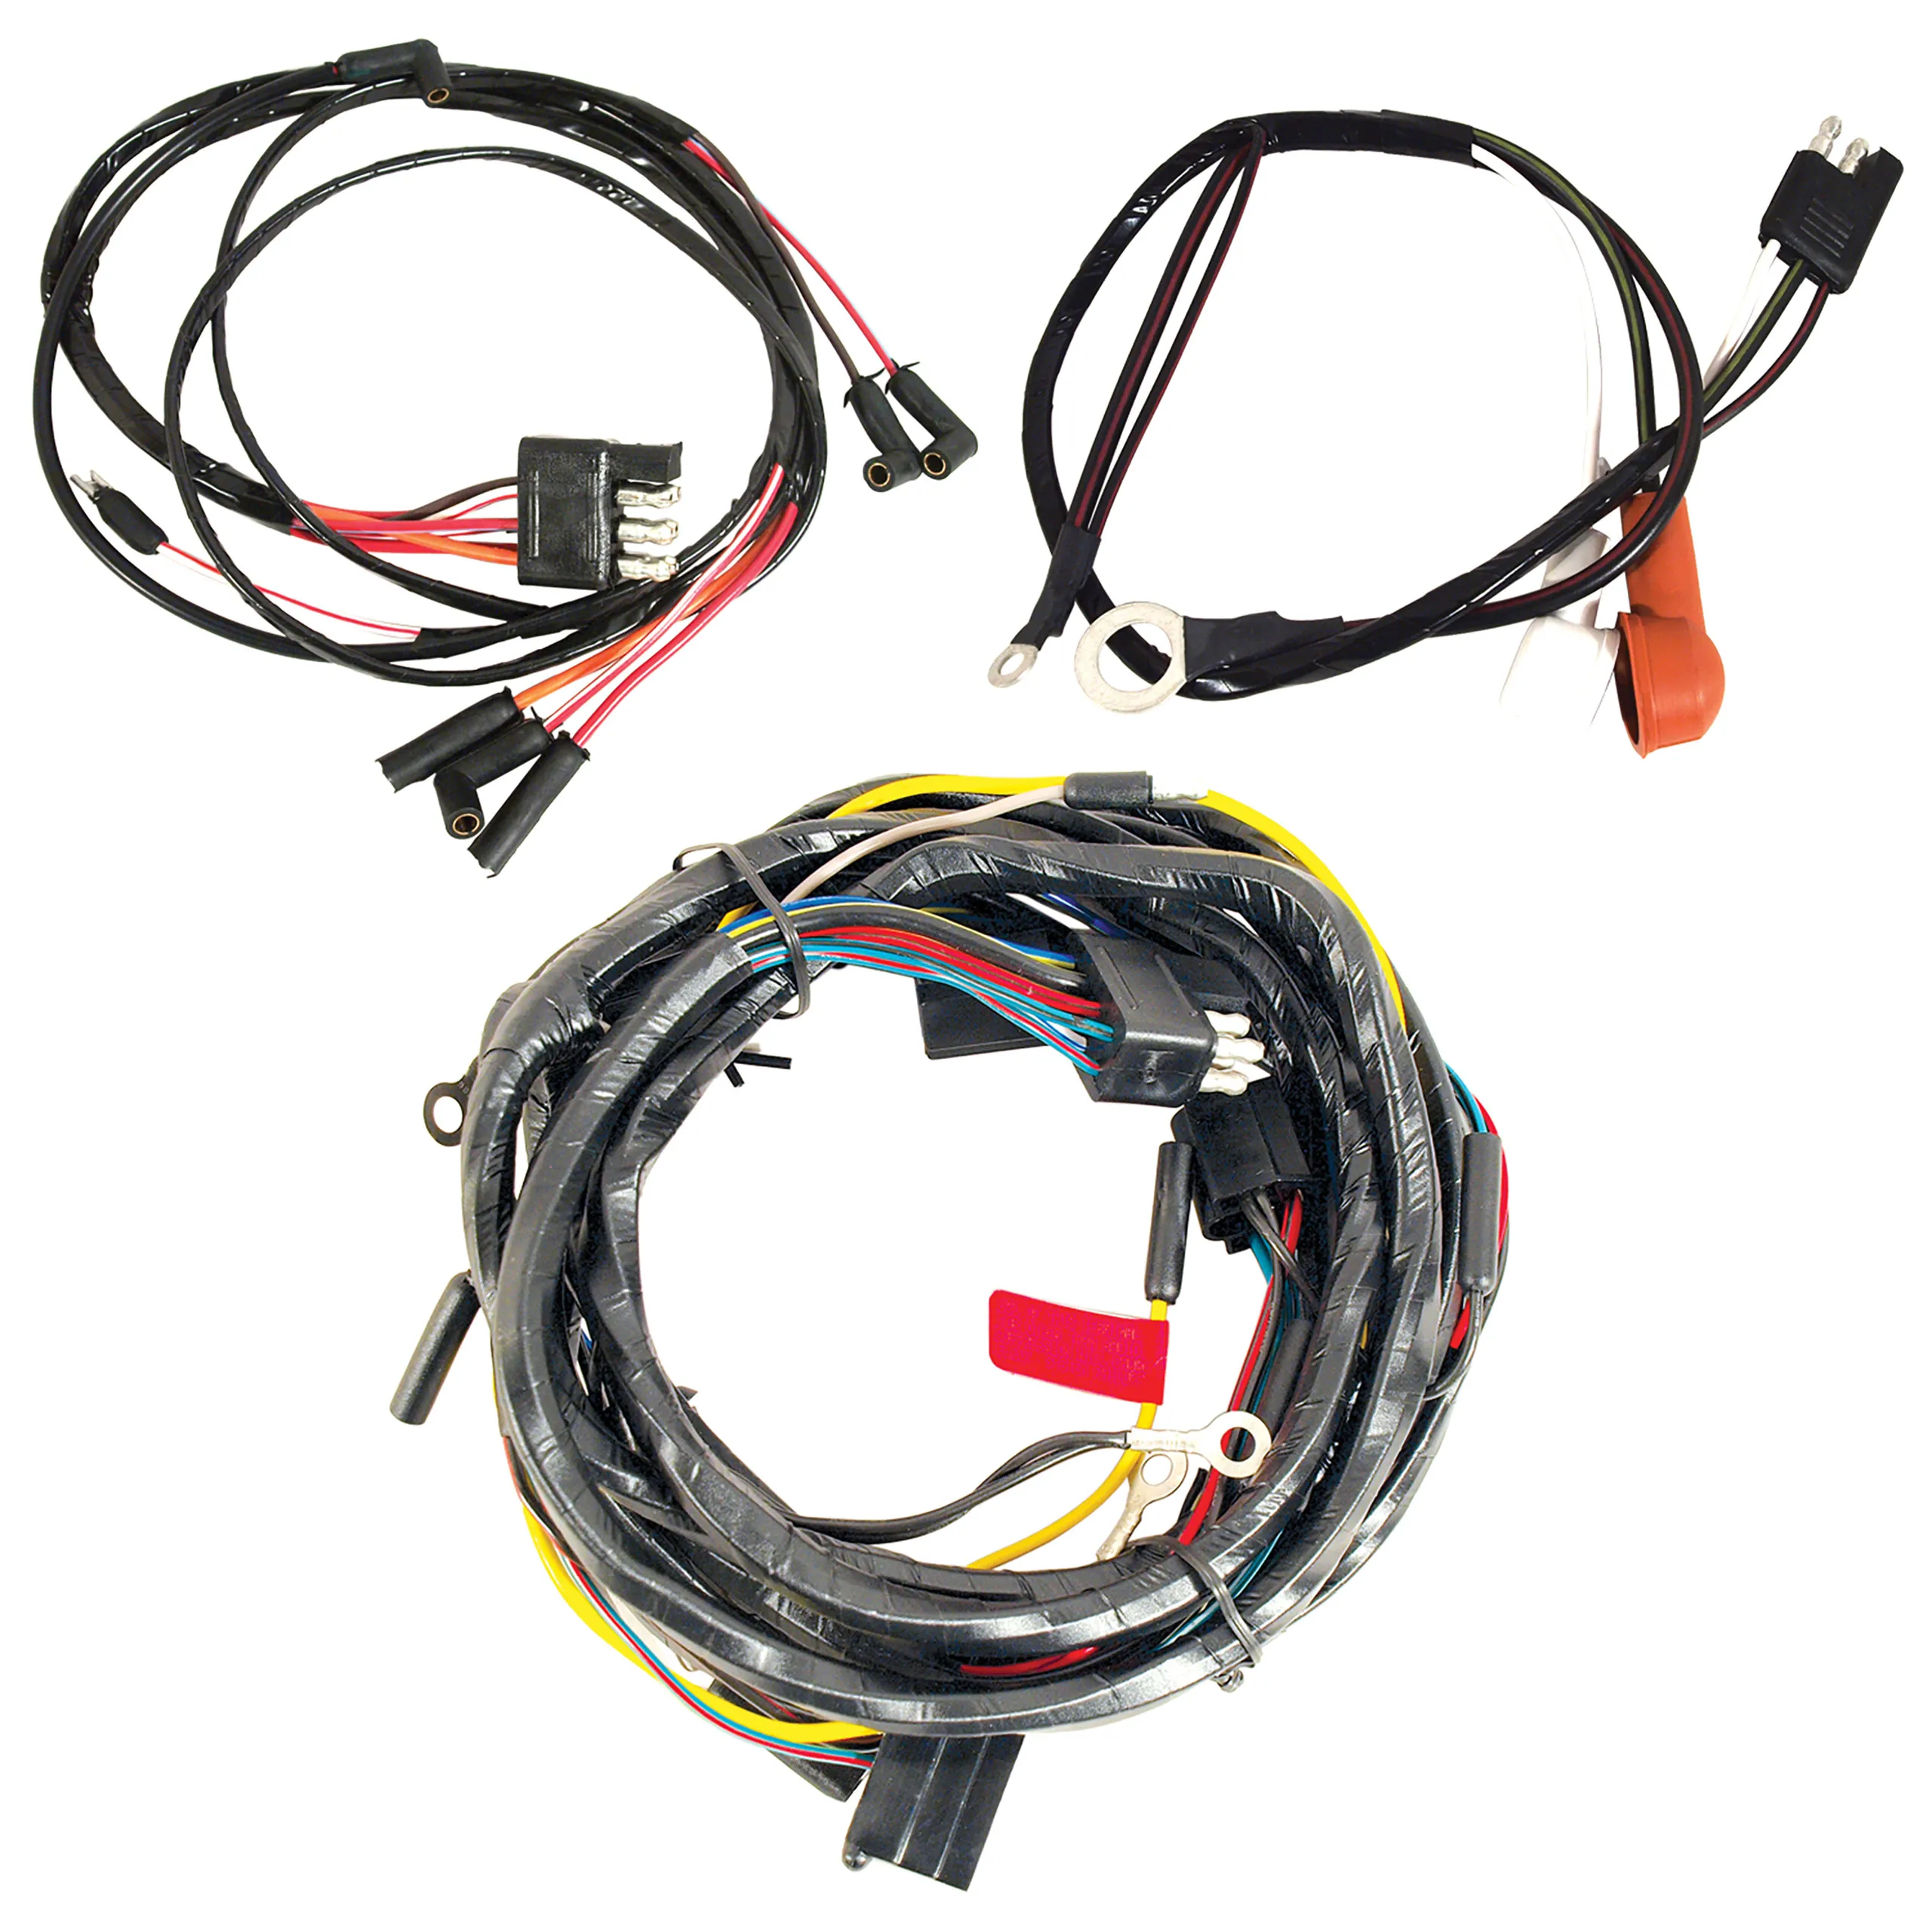 First Generation 1965 Ford Mustang Wiring Harness - 8 Cylinder - W/Gauges & 2 Speed Heater Motor - CA